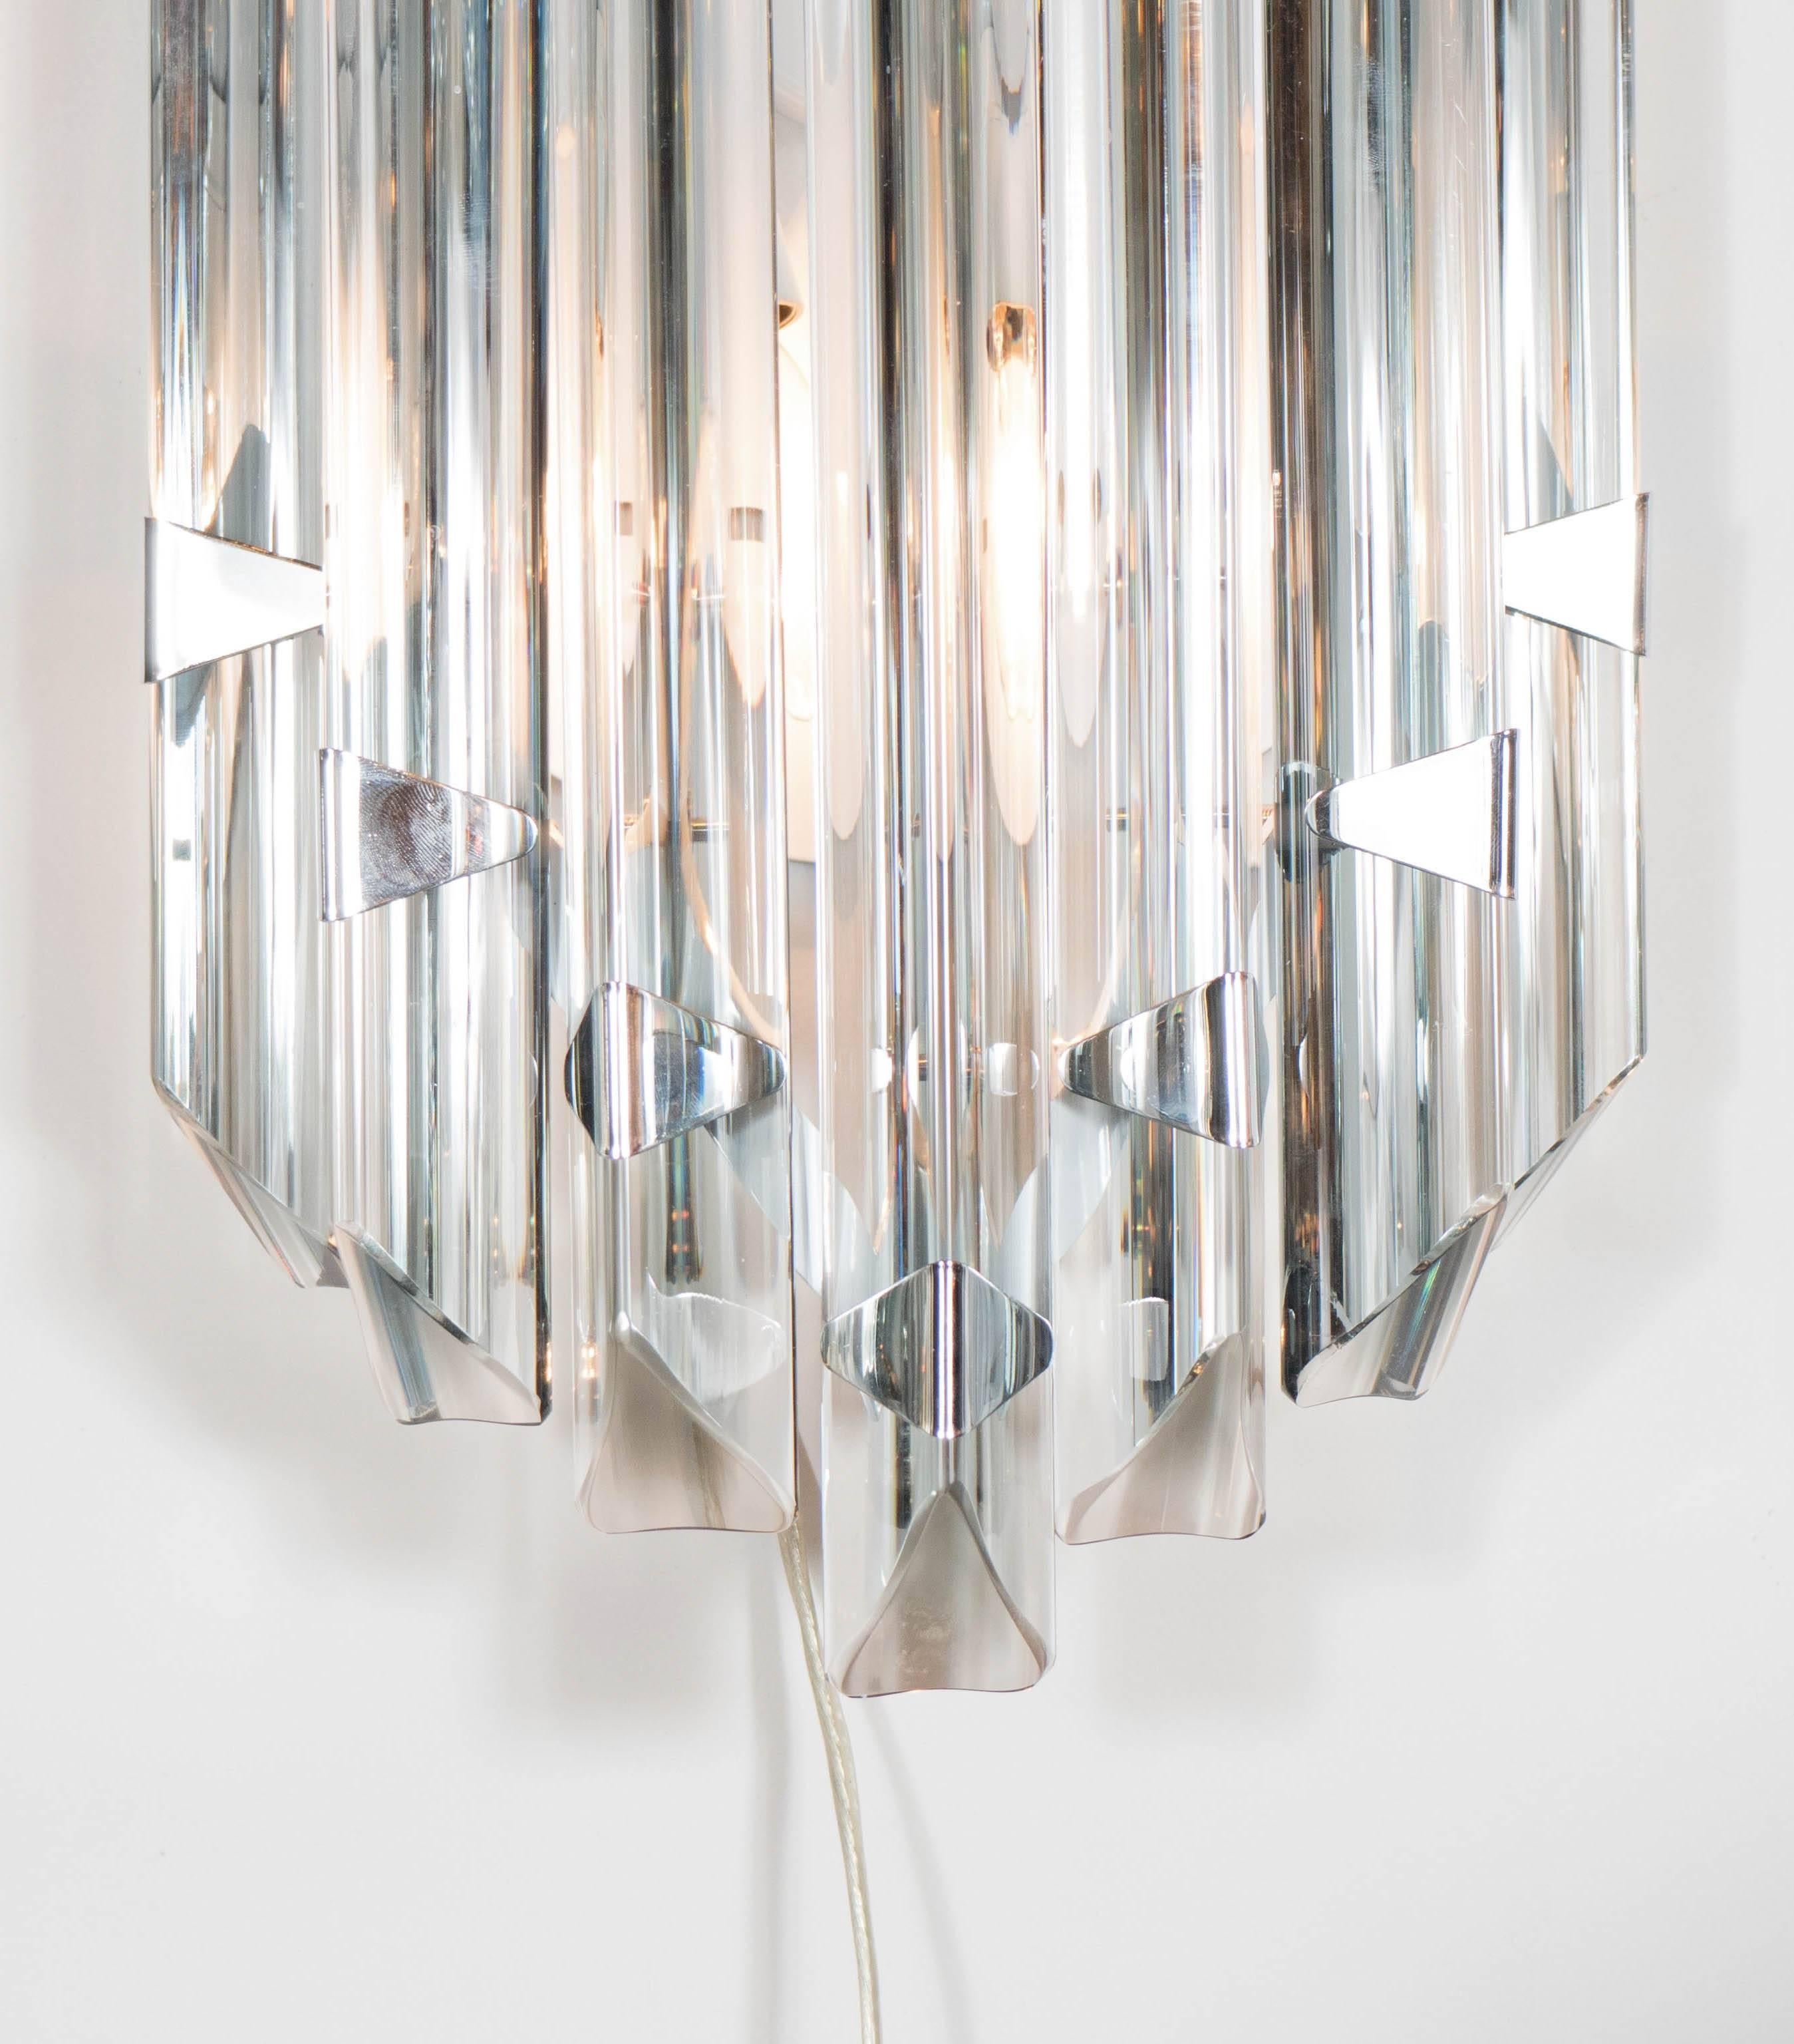 Polished Pair of Mid-Century Modernist Sconces in Smoked Murano Glass with Nickel